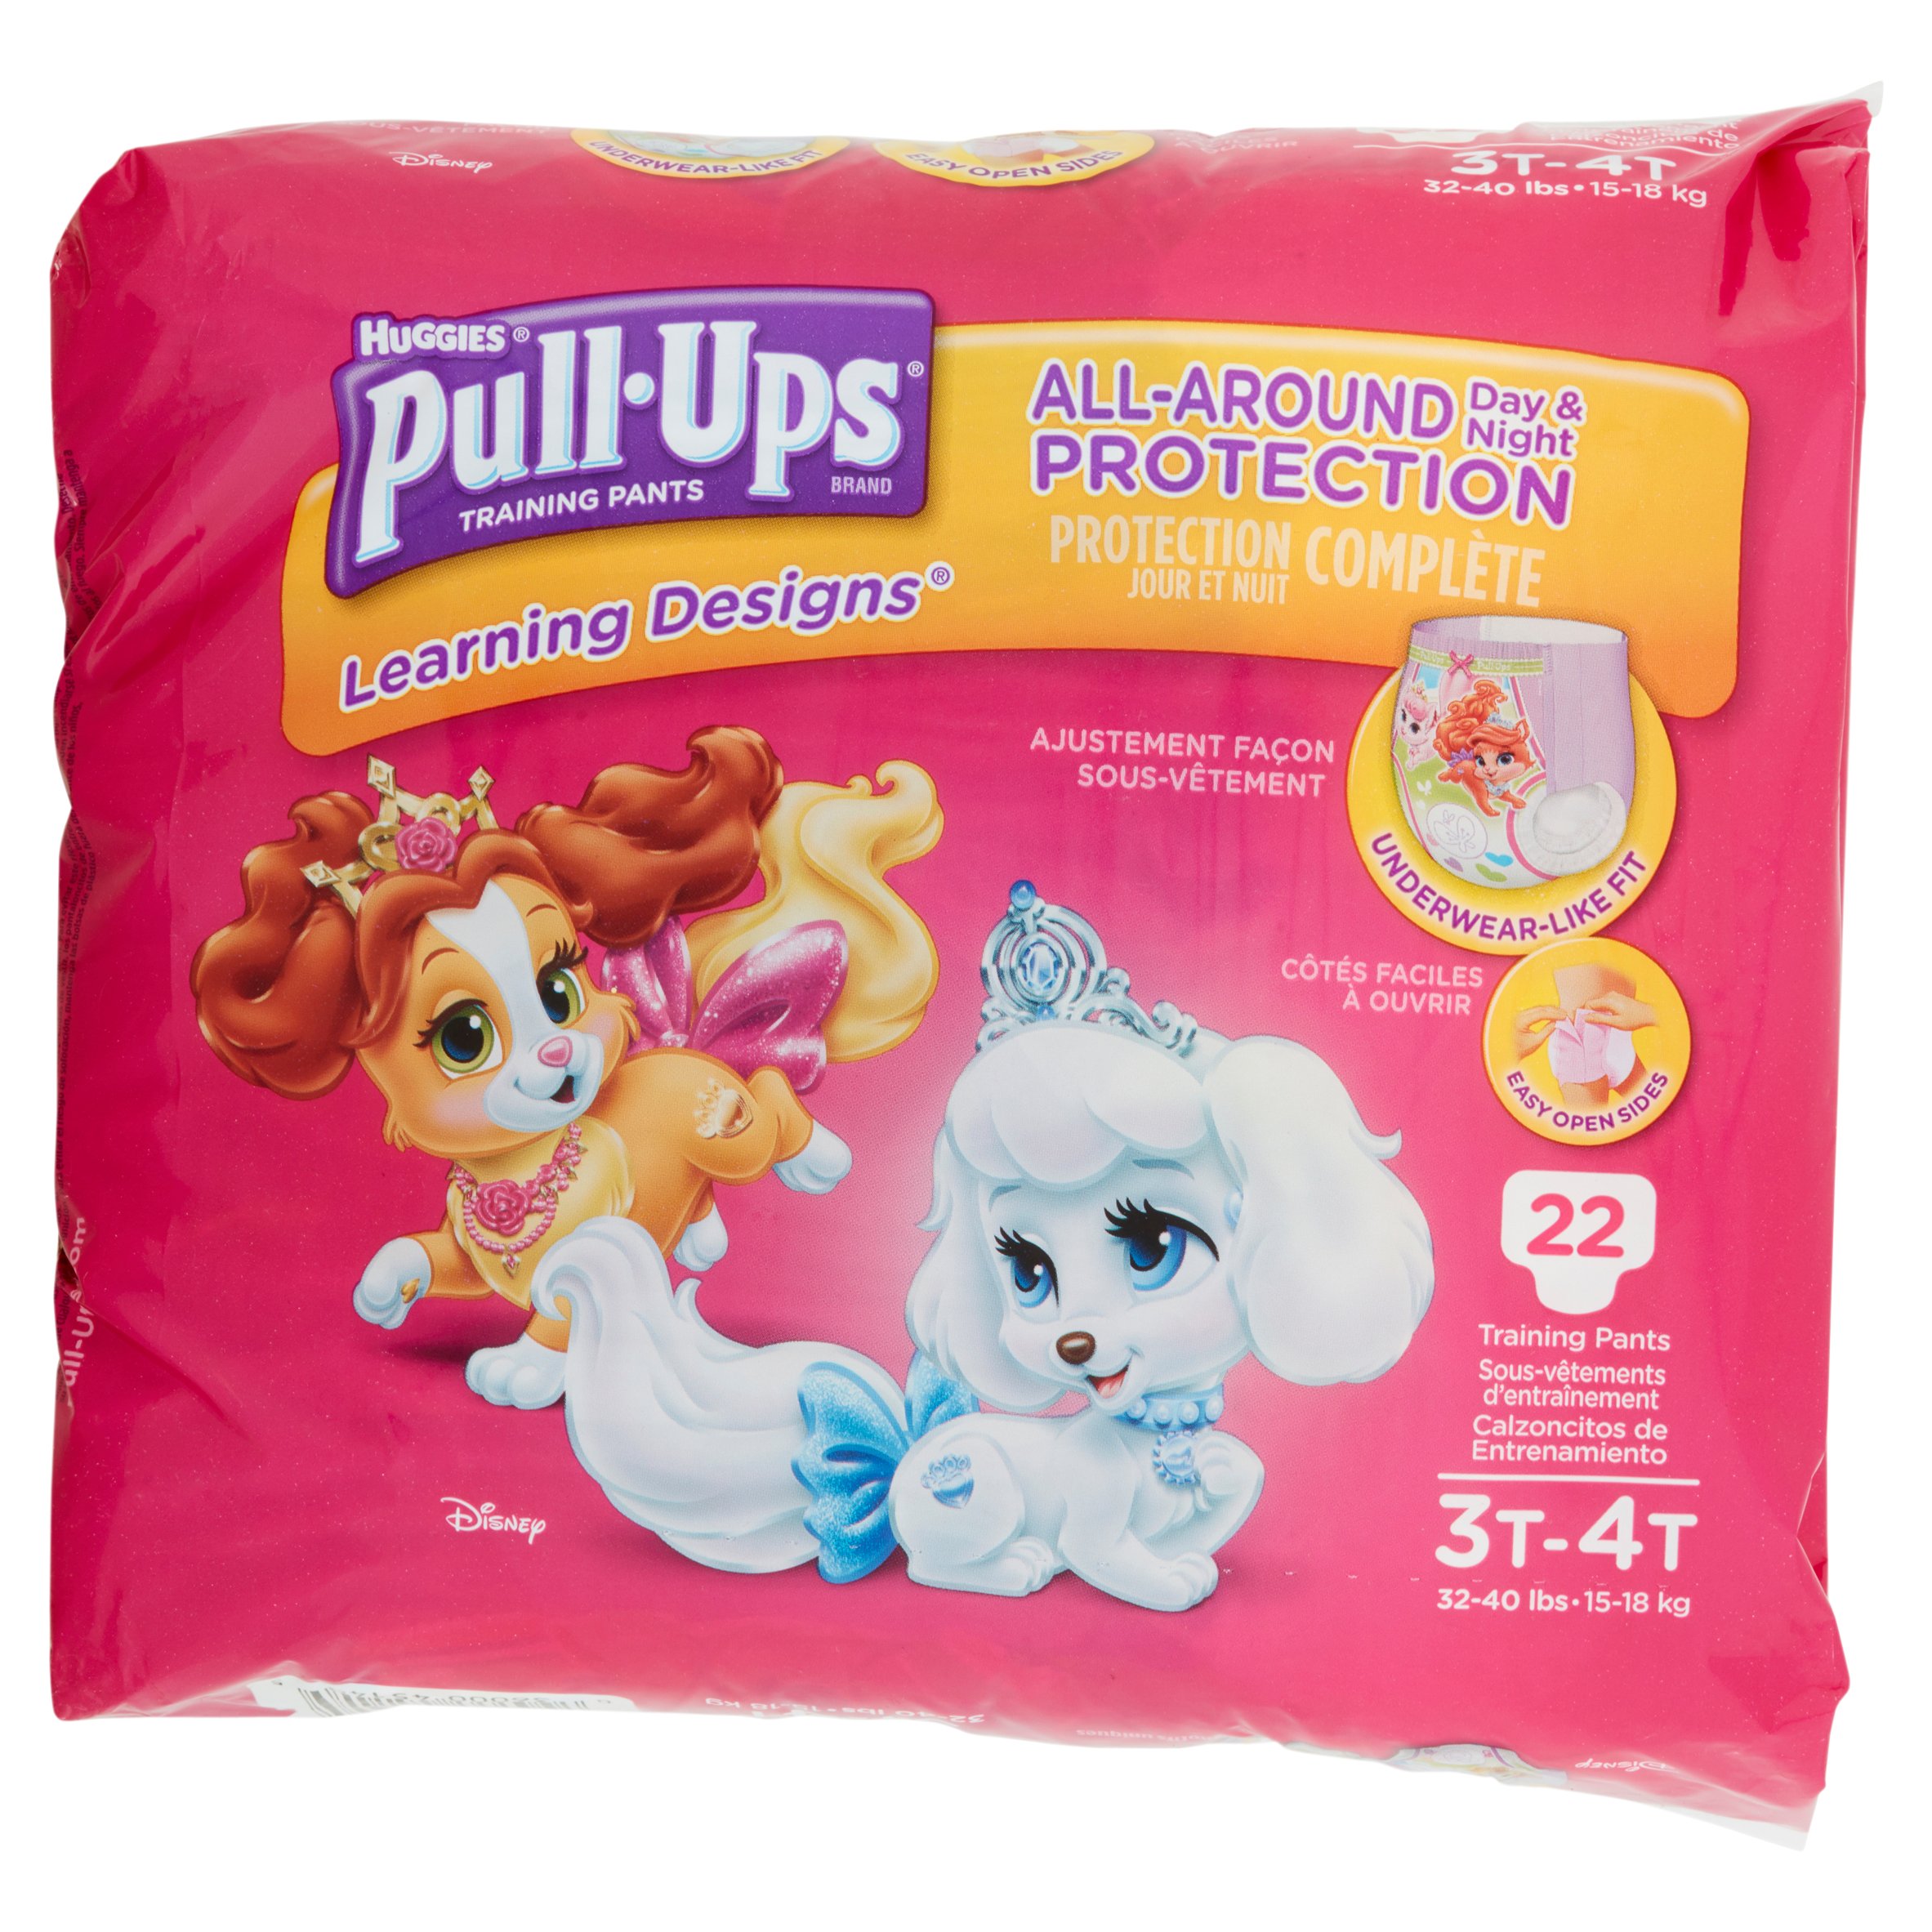 Huggies Pull-Ups All-Around Day & Night Protection Training Pants 3T-4T 32-40 lbs, 22 count - image 4 of 5